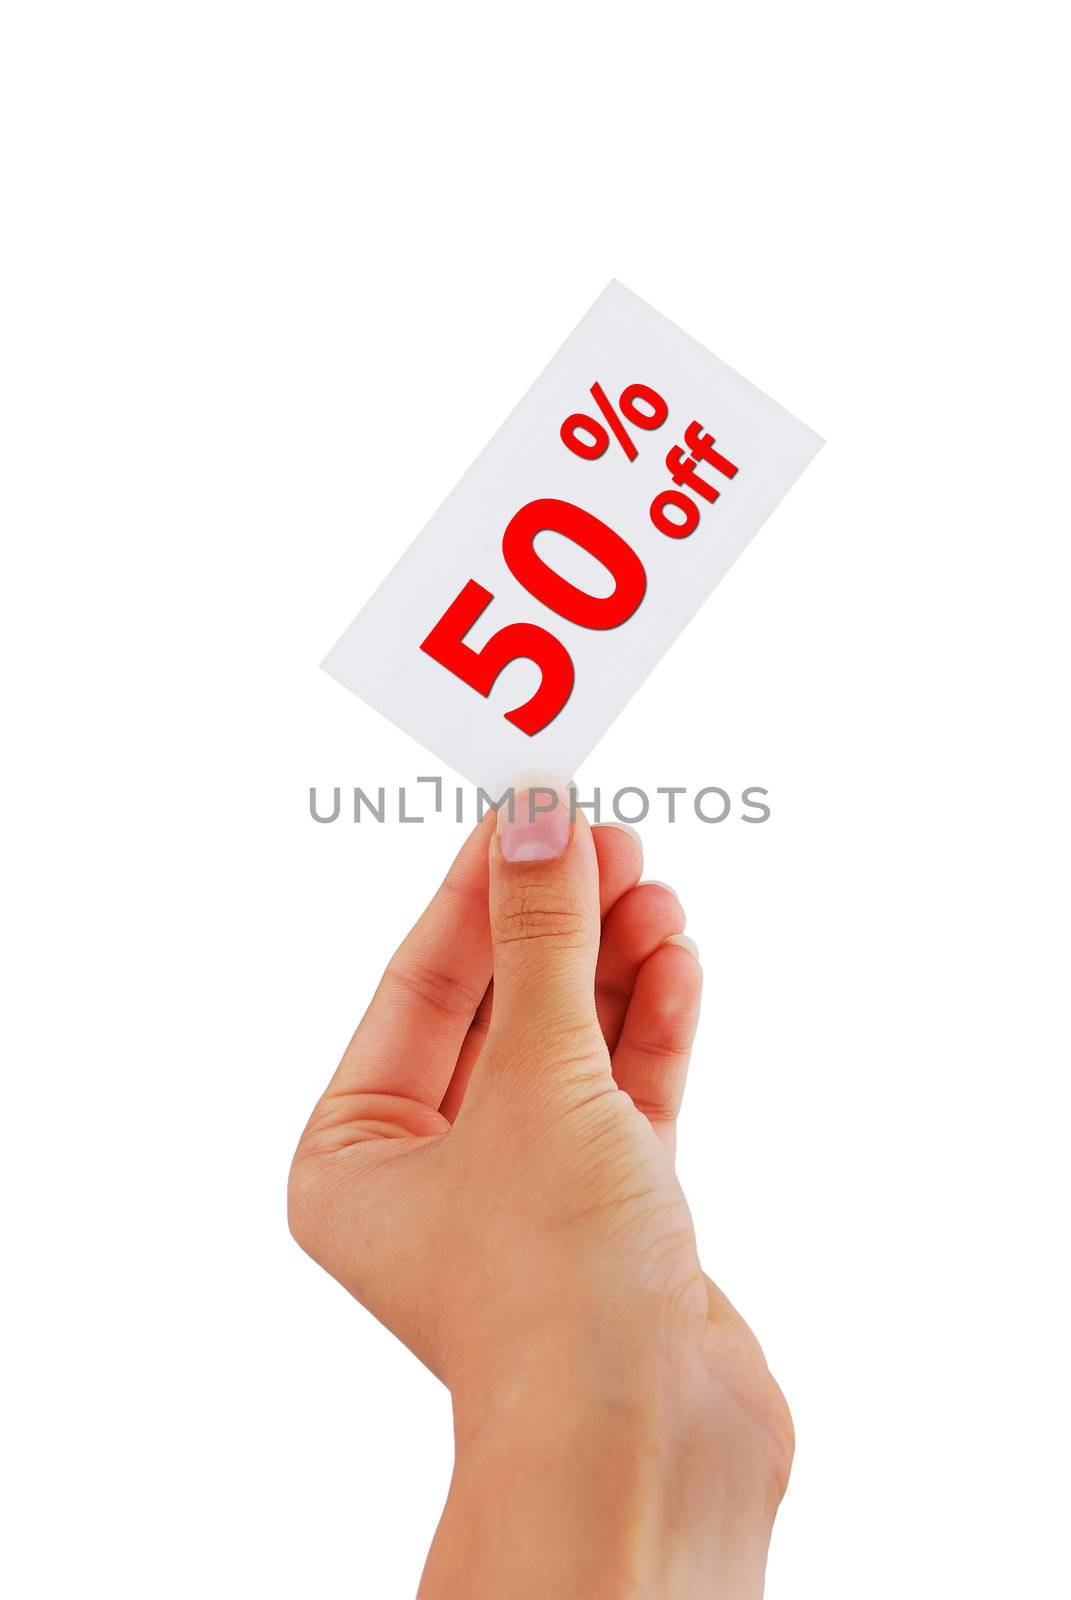 discount of 50 percent in hand on white background